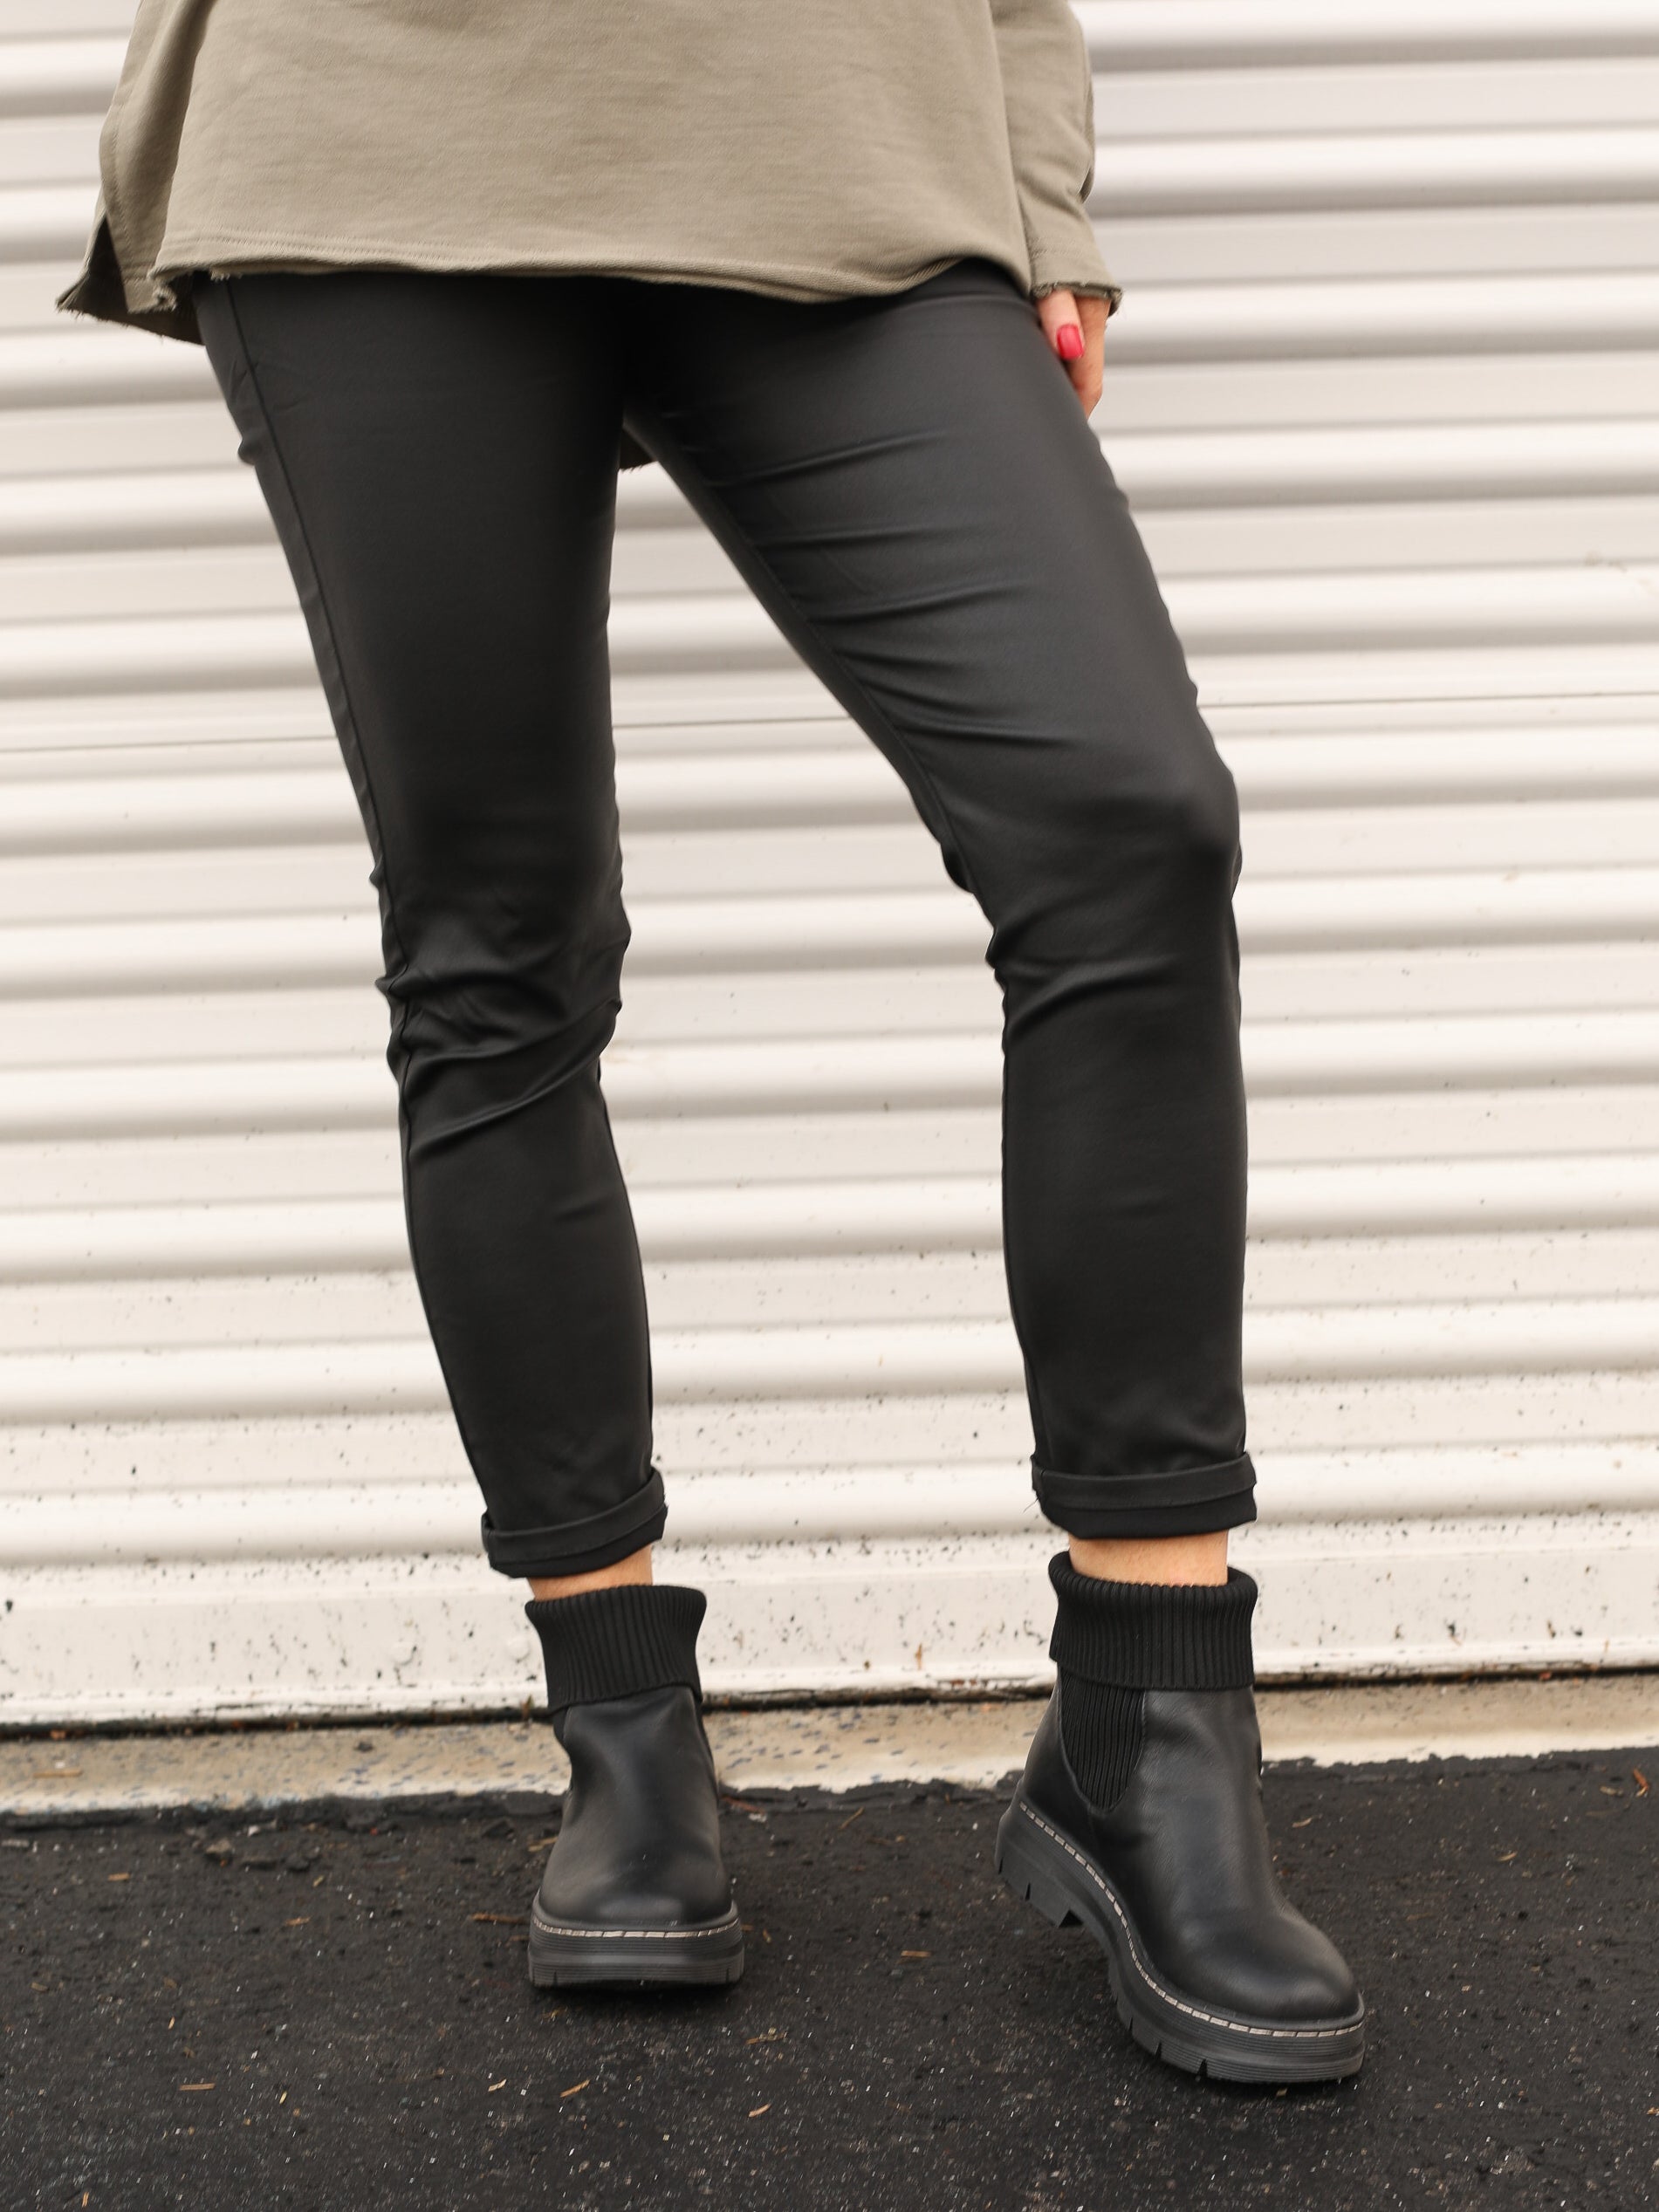 Metallic leggings front view with boots